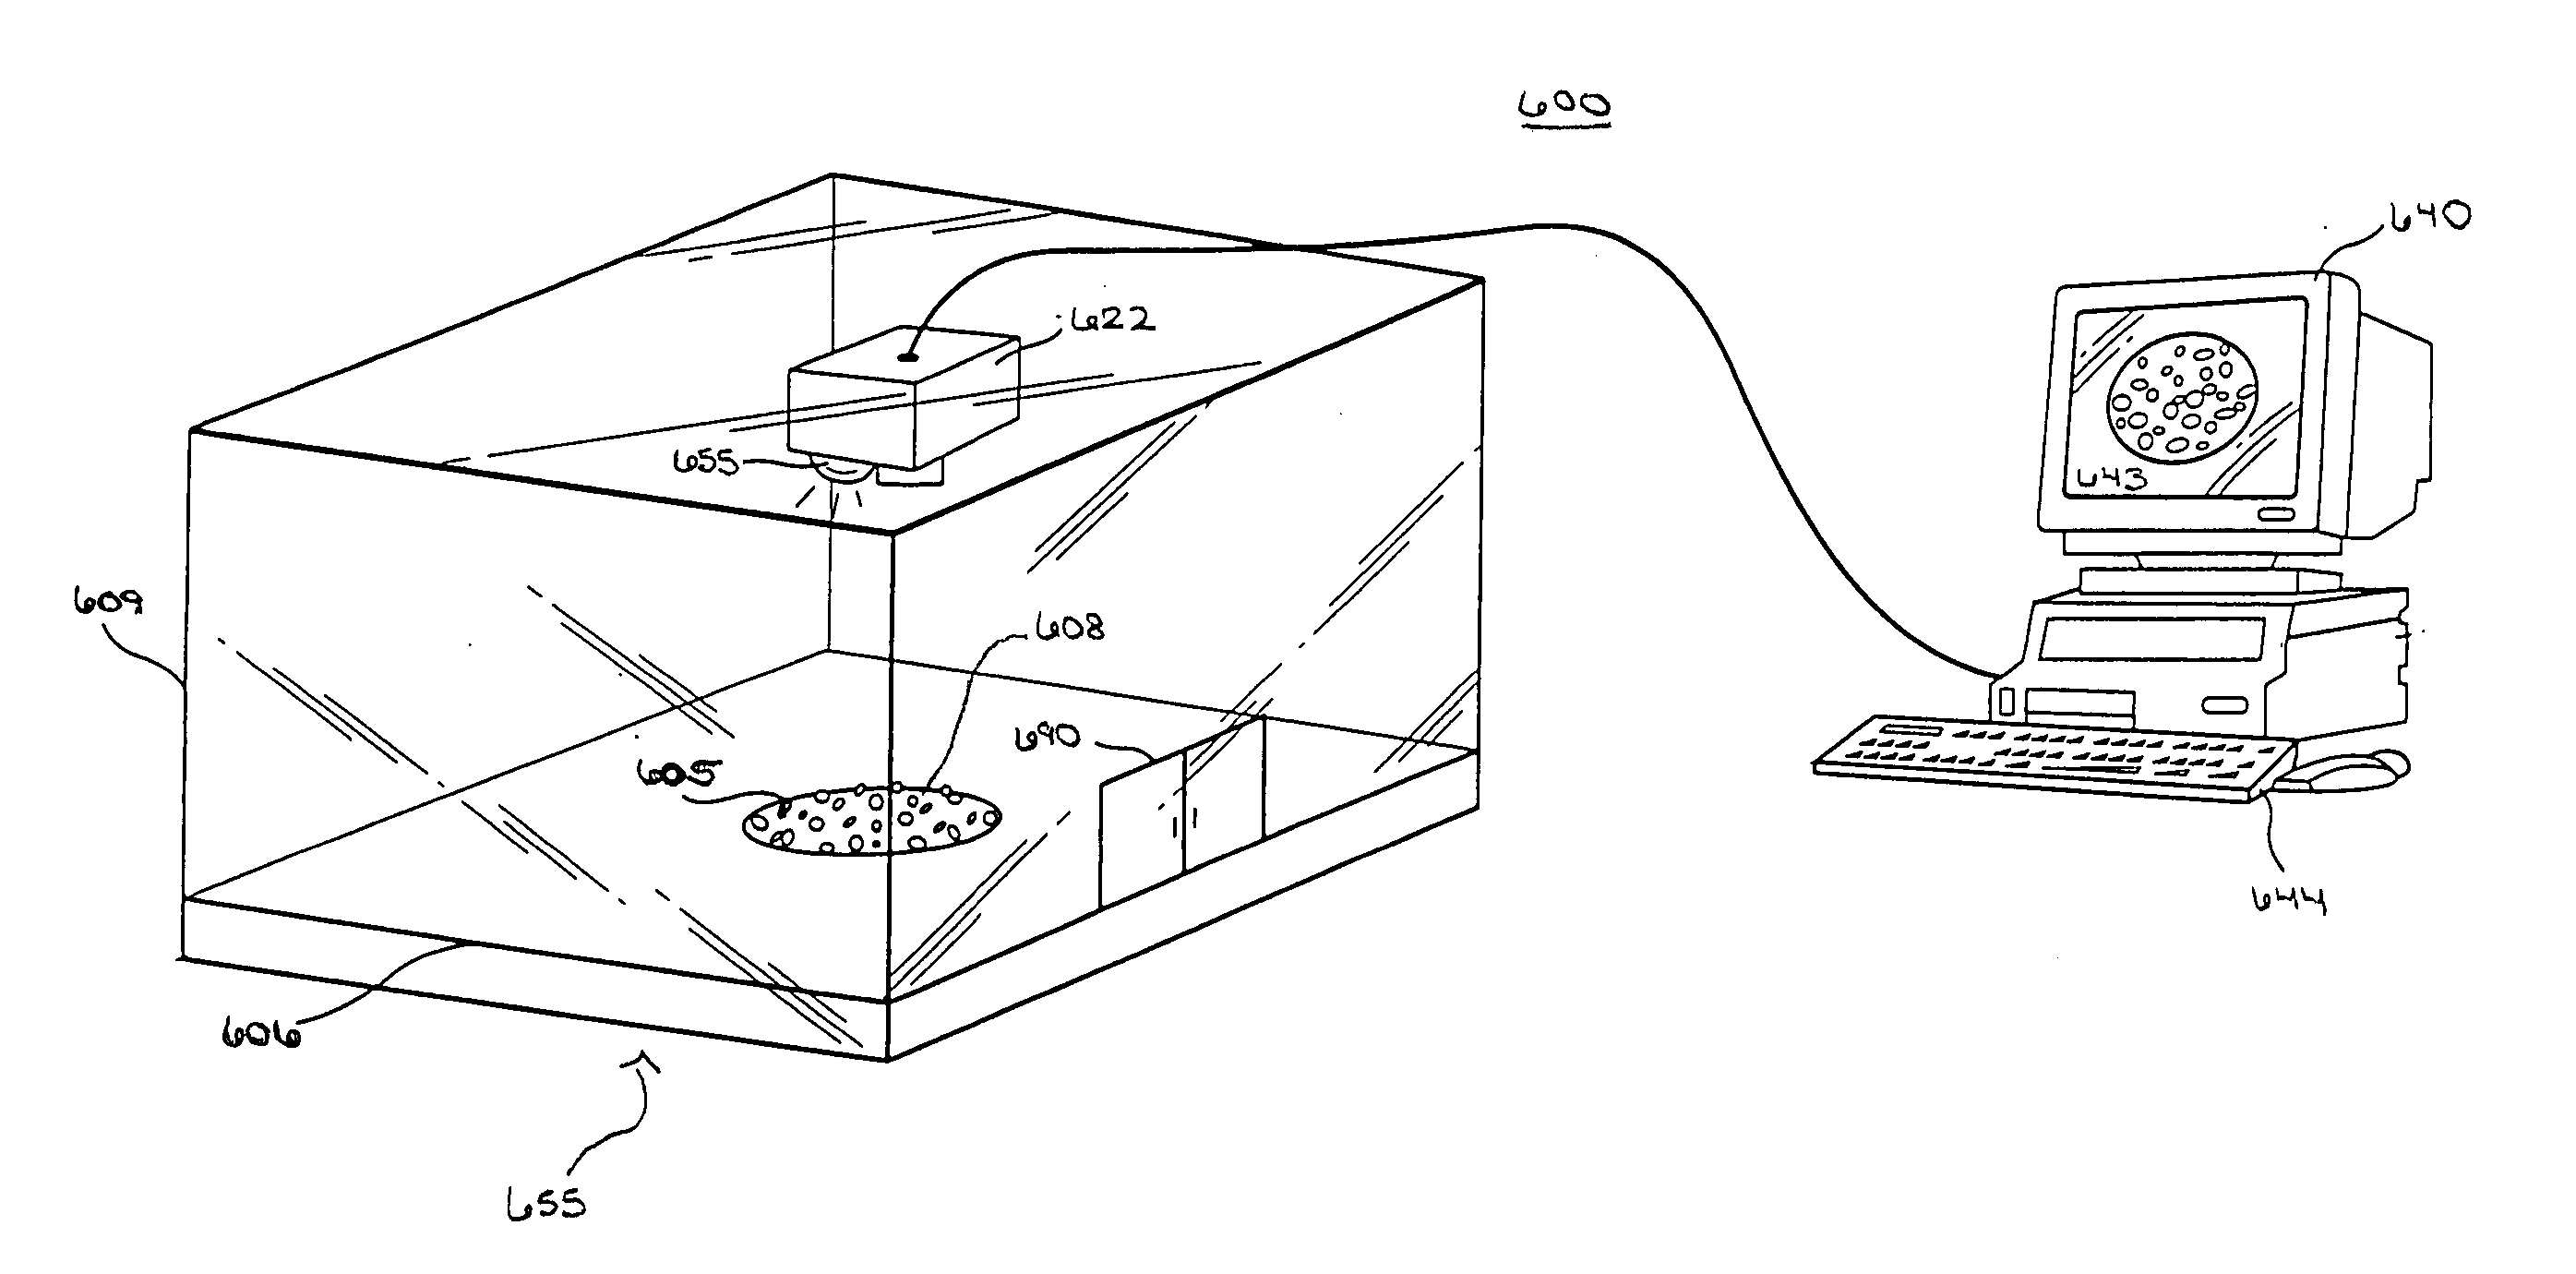 Method and apparatus for analyzing quality traits of grain or seed